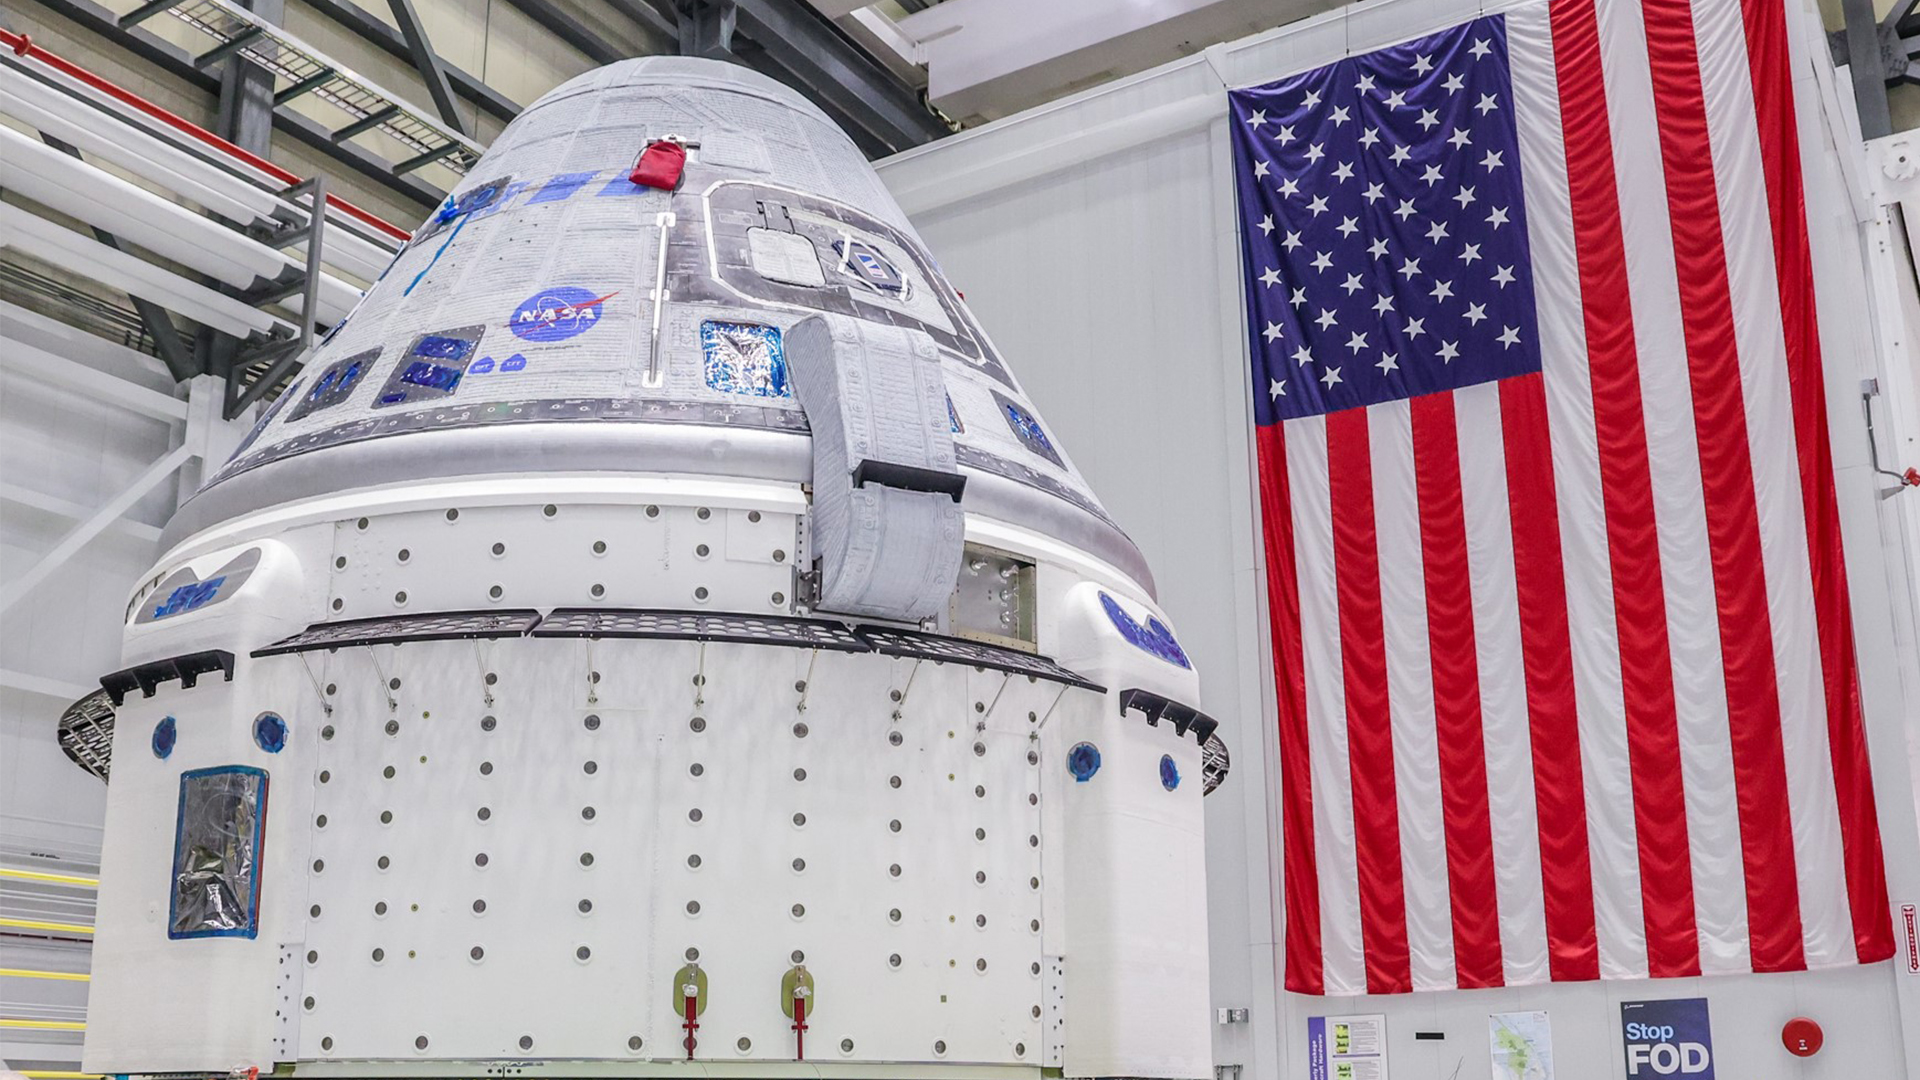 Boeings 1st Starliner astronaut flight test for NASA could launch as soon as May 1